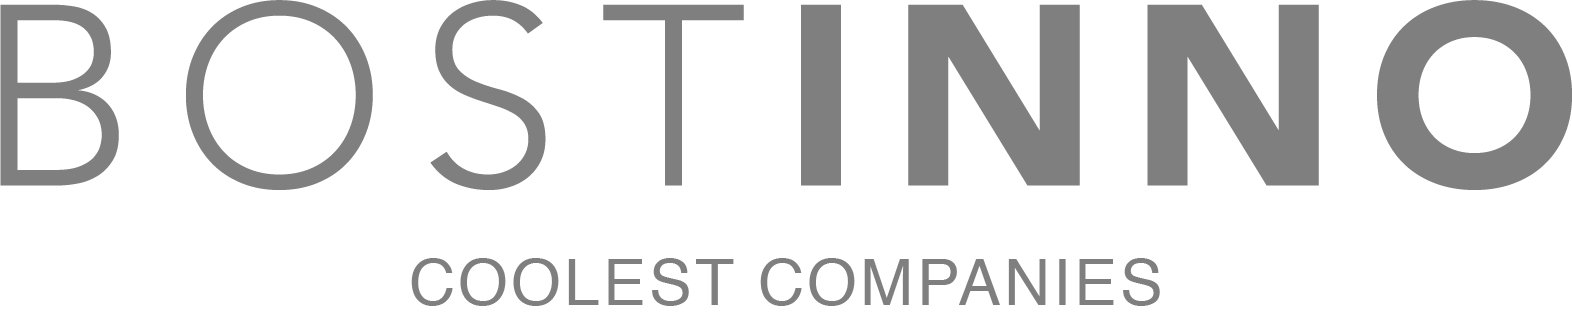 Compt Nominated As a Bostinno Coolest Company Finalist!